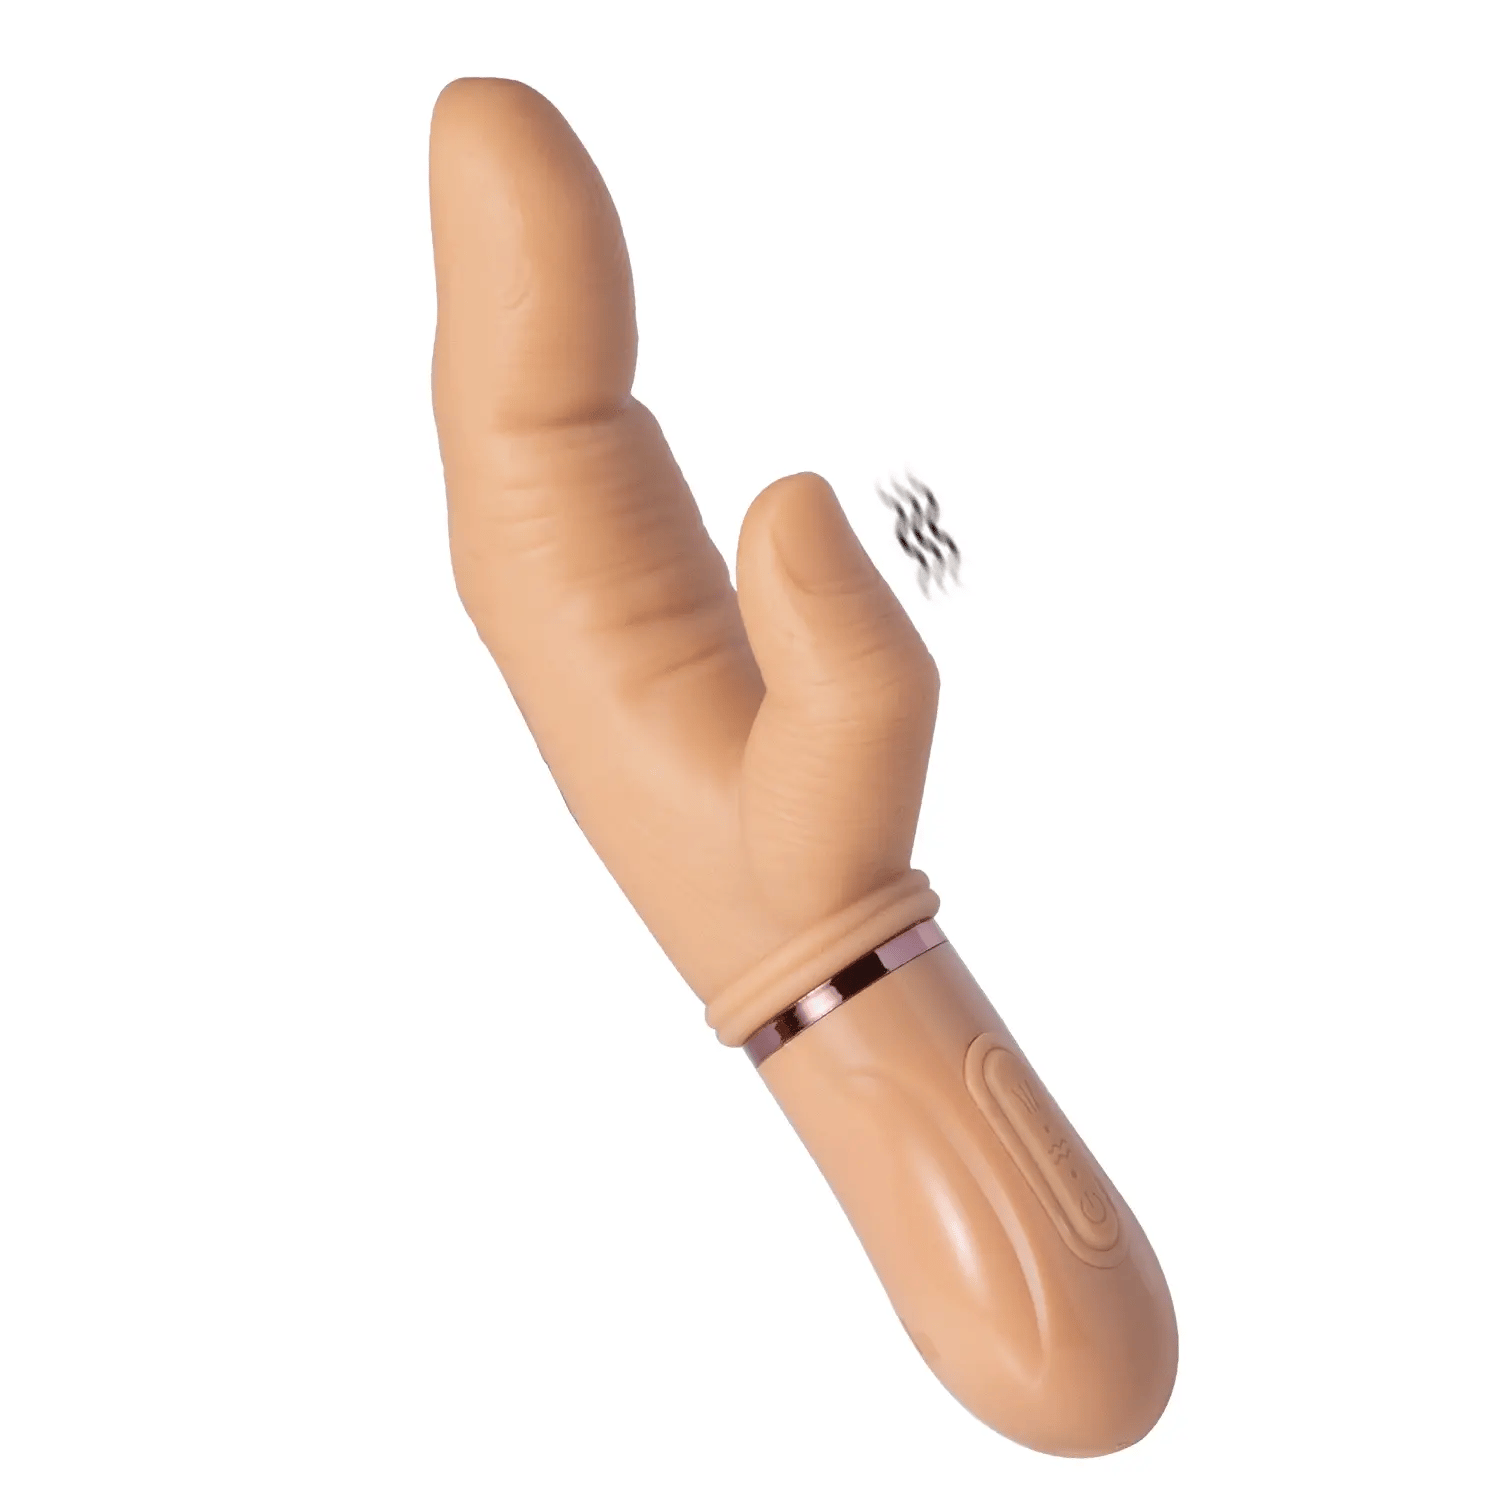 Zayn - Vibrating & Tapping Realistic Finger-shaped Dildo 4.4 Inch